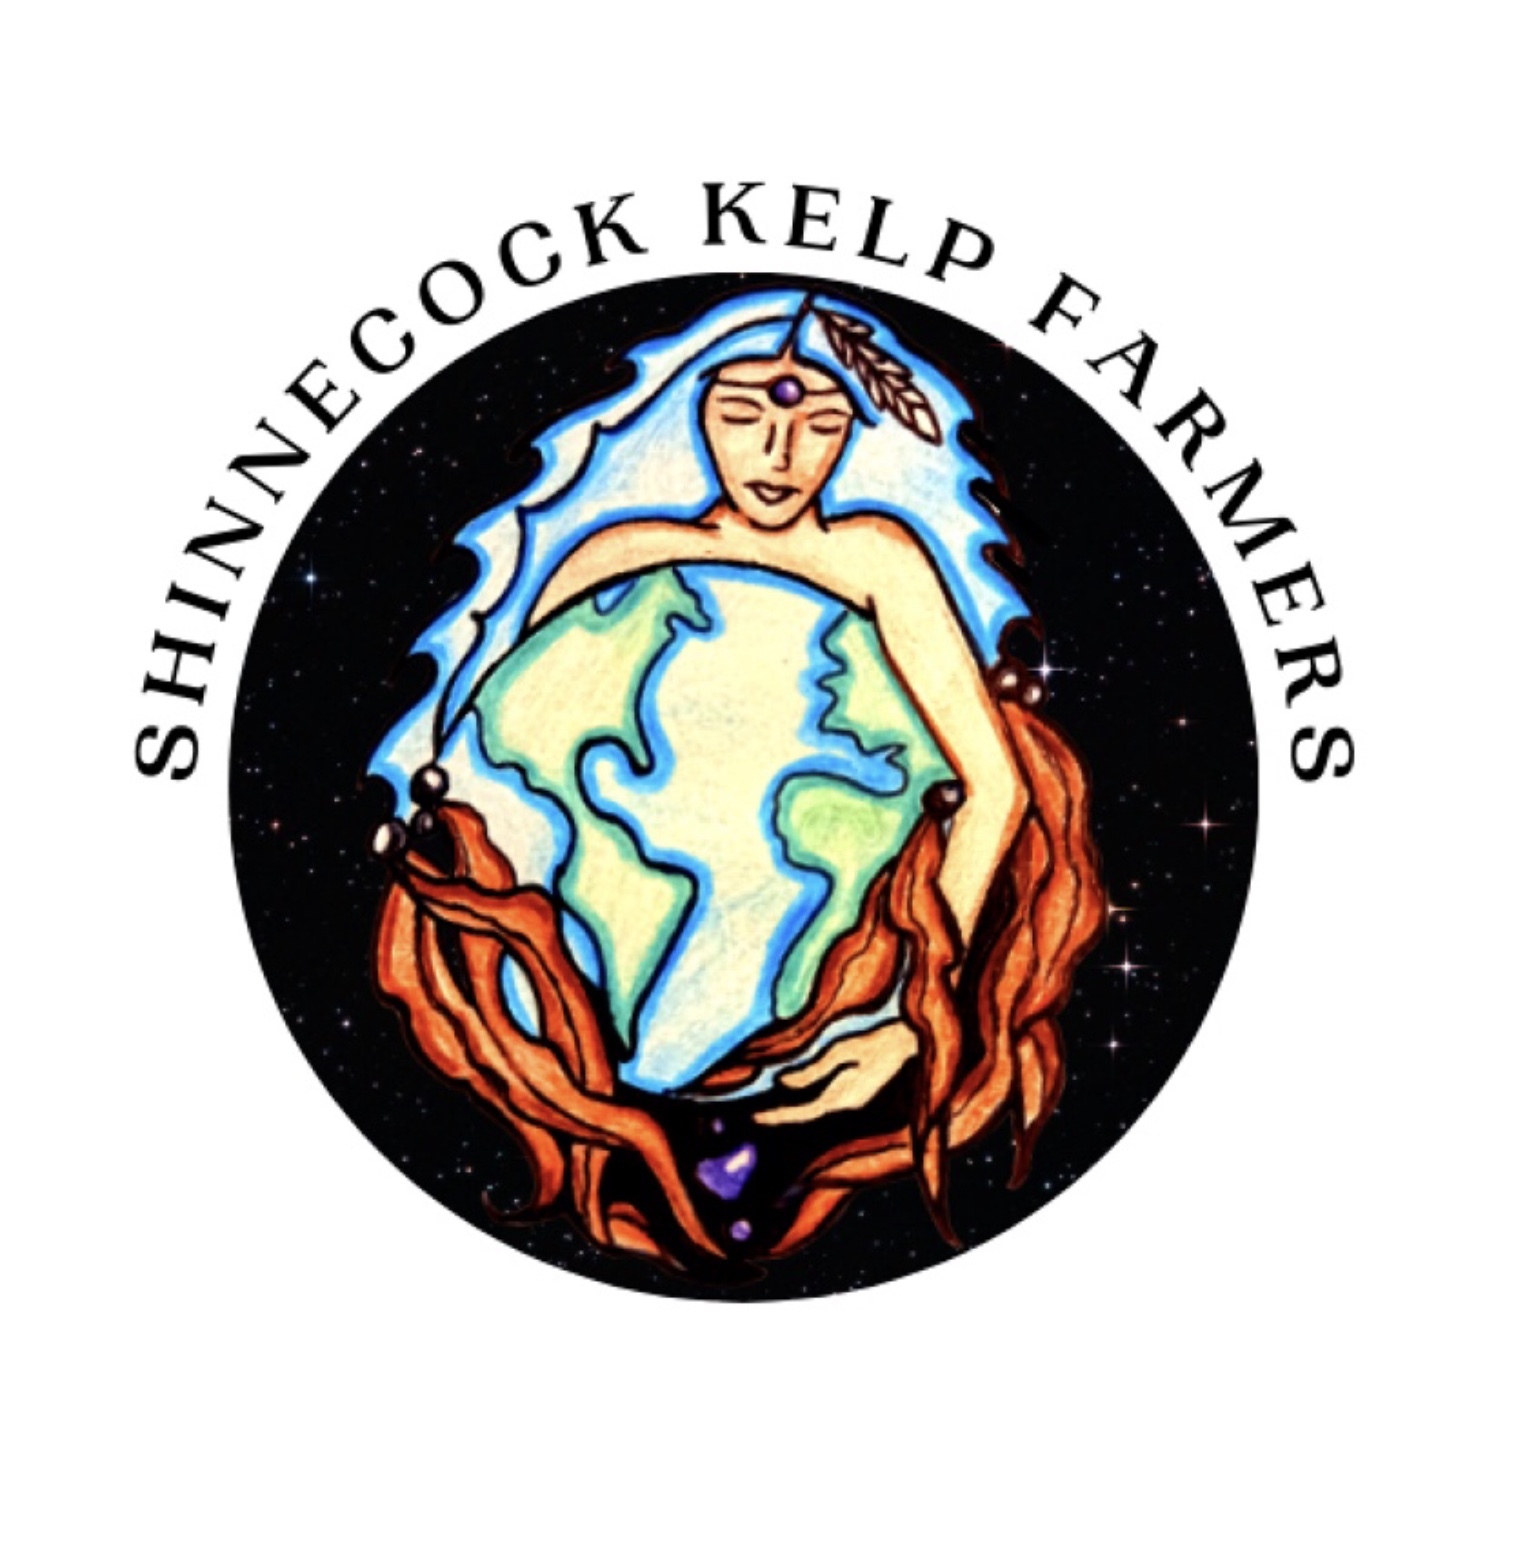 Shinnecock Kelp Farmers was created in 2020 was a group of Shinnecock women. The organization seeks to combat climate change, and improve both the health and biodiversity in Shinnecock Bay. COURTESY SHINNECOCK KELP FARMERS